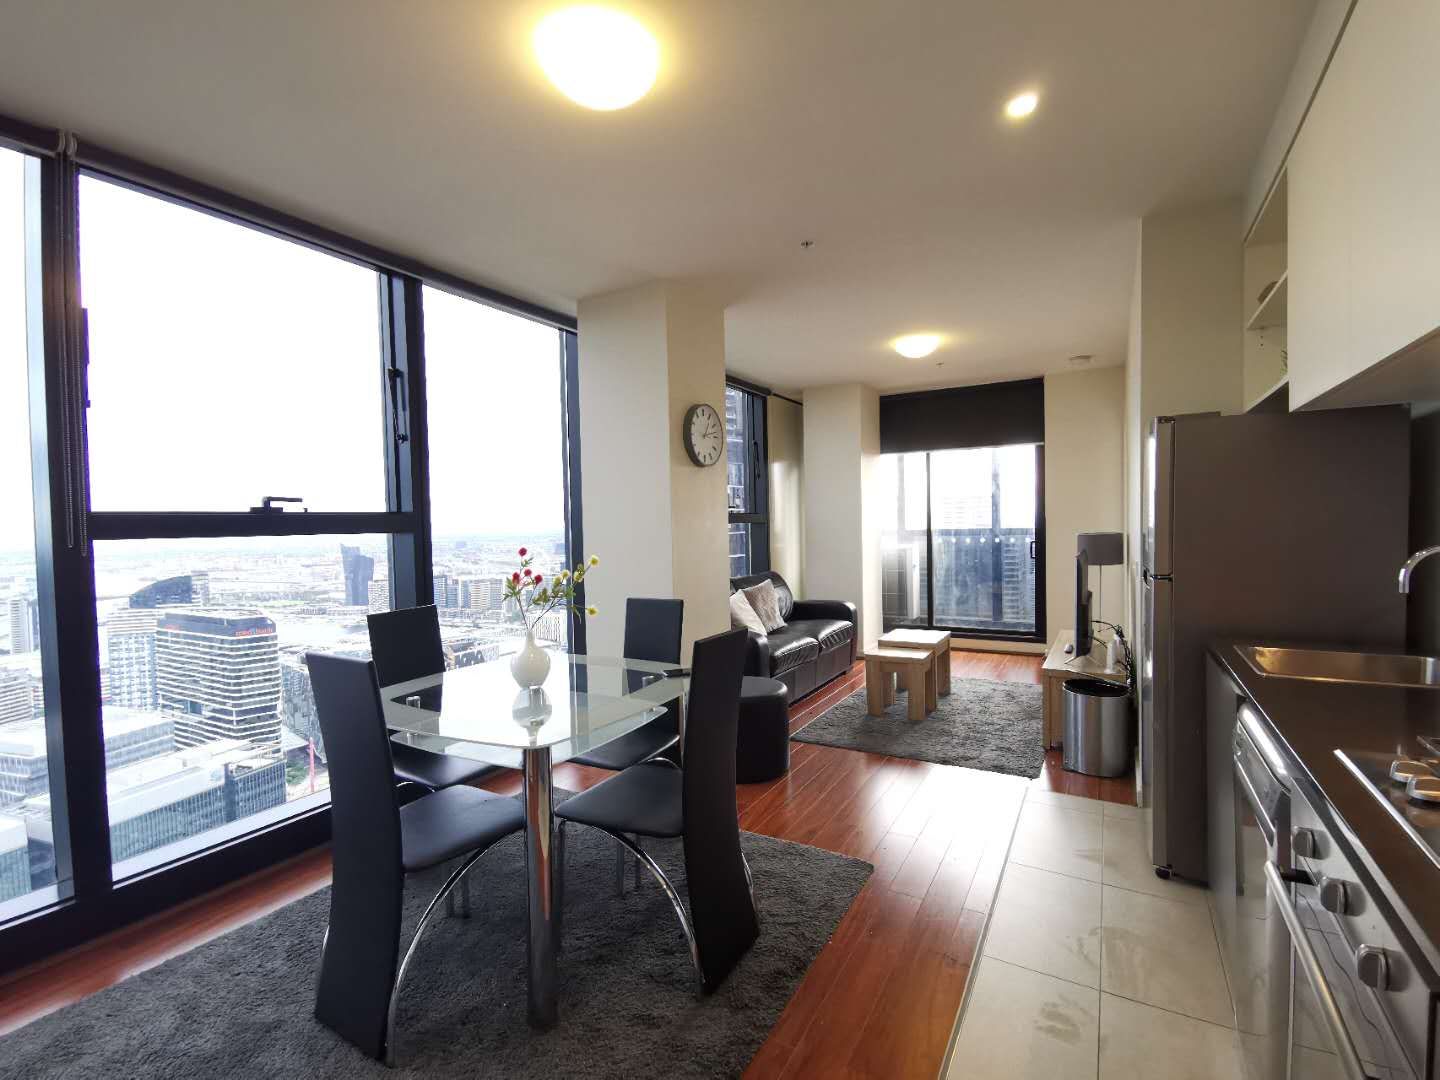 2 bedrooms Apartment / Unit / Flat in 4708/568 Collins Street MELBOURNE VIC, 3000